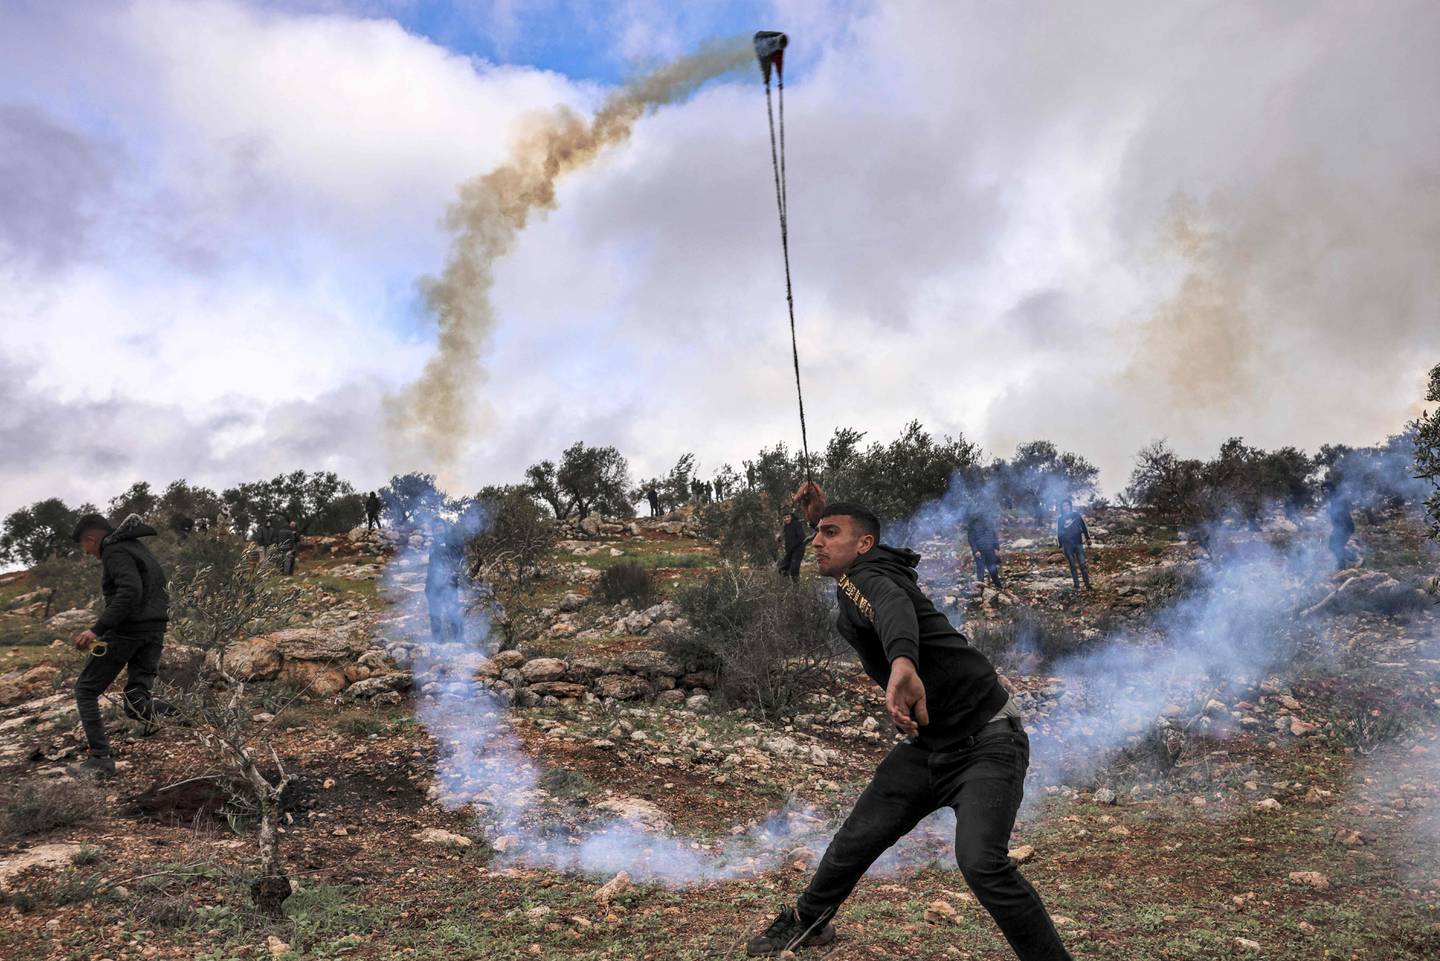 A Palestinian uses a slingshot to return a tear gas canister at Israeli security forces, as a rally against settlements in Beita in the occupied West Bank turned violent. AFP